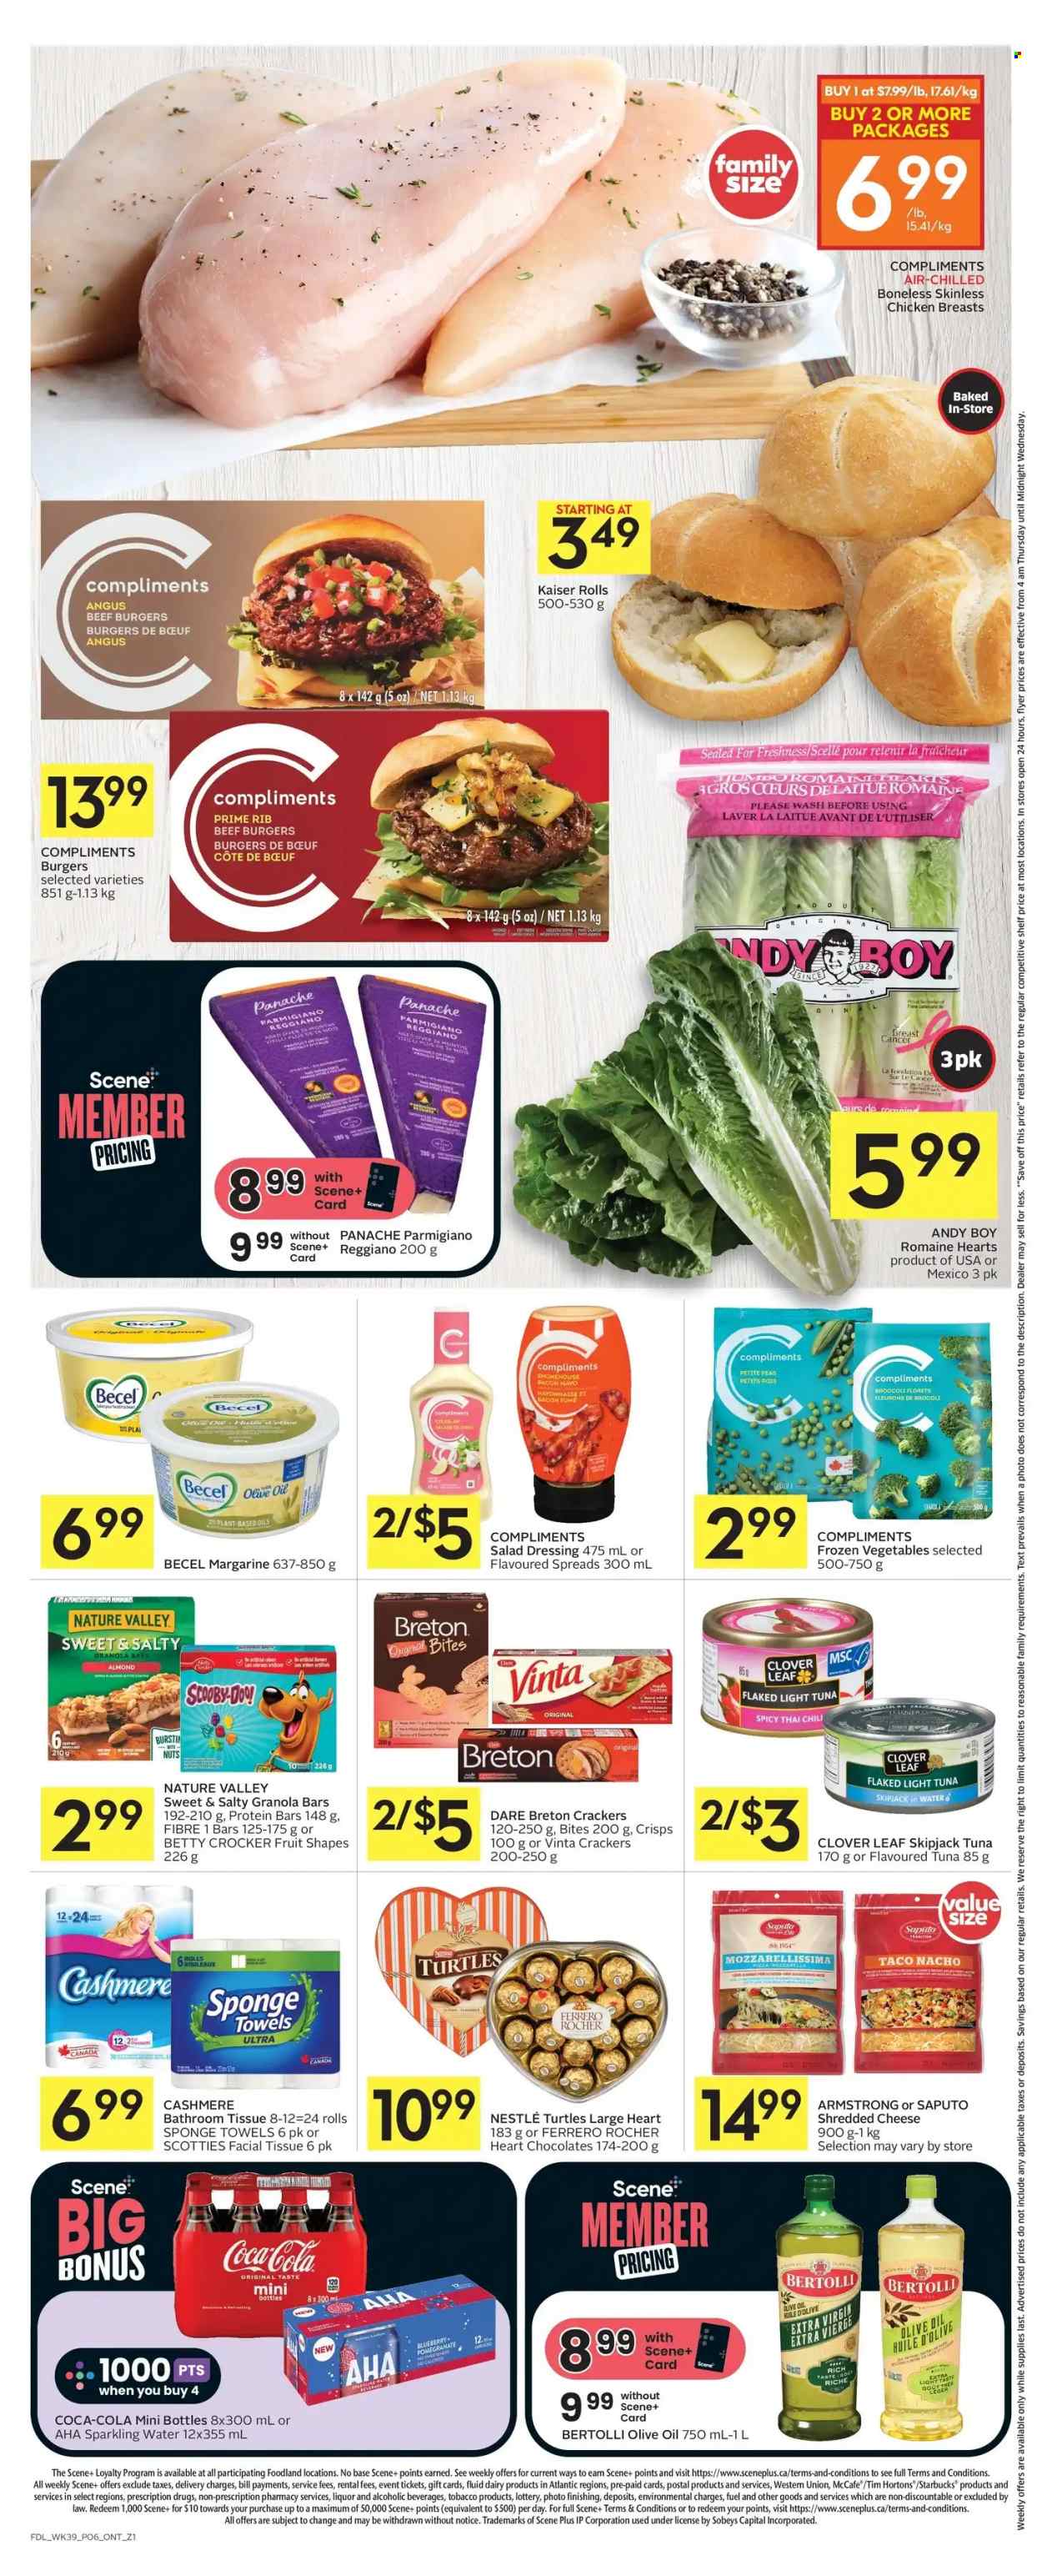 thumbnail - Foodland Flyer - January 26, 2023 - February 01, 2023 - Sales products - broccoli, peas, pomegranate, tuna, hamburger, beef burger, Bertolli, bacon, shredded cheese, Parmigiano Reggiano, Clover, margarine, mayonnaise, frozen vegetables, chocolate, crackers, light tuna, protein bar, granola bar, Nature Valley, salad dressing, dressing, extra virgin olive oil, Coca-Cola, sparkling water, Starbucks, McCafe, liquor, chicken breasts, beef meat, bath tissue, turtles, Nestlé, Ferrero Rocher. Page 8.